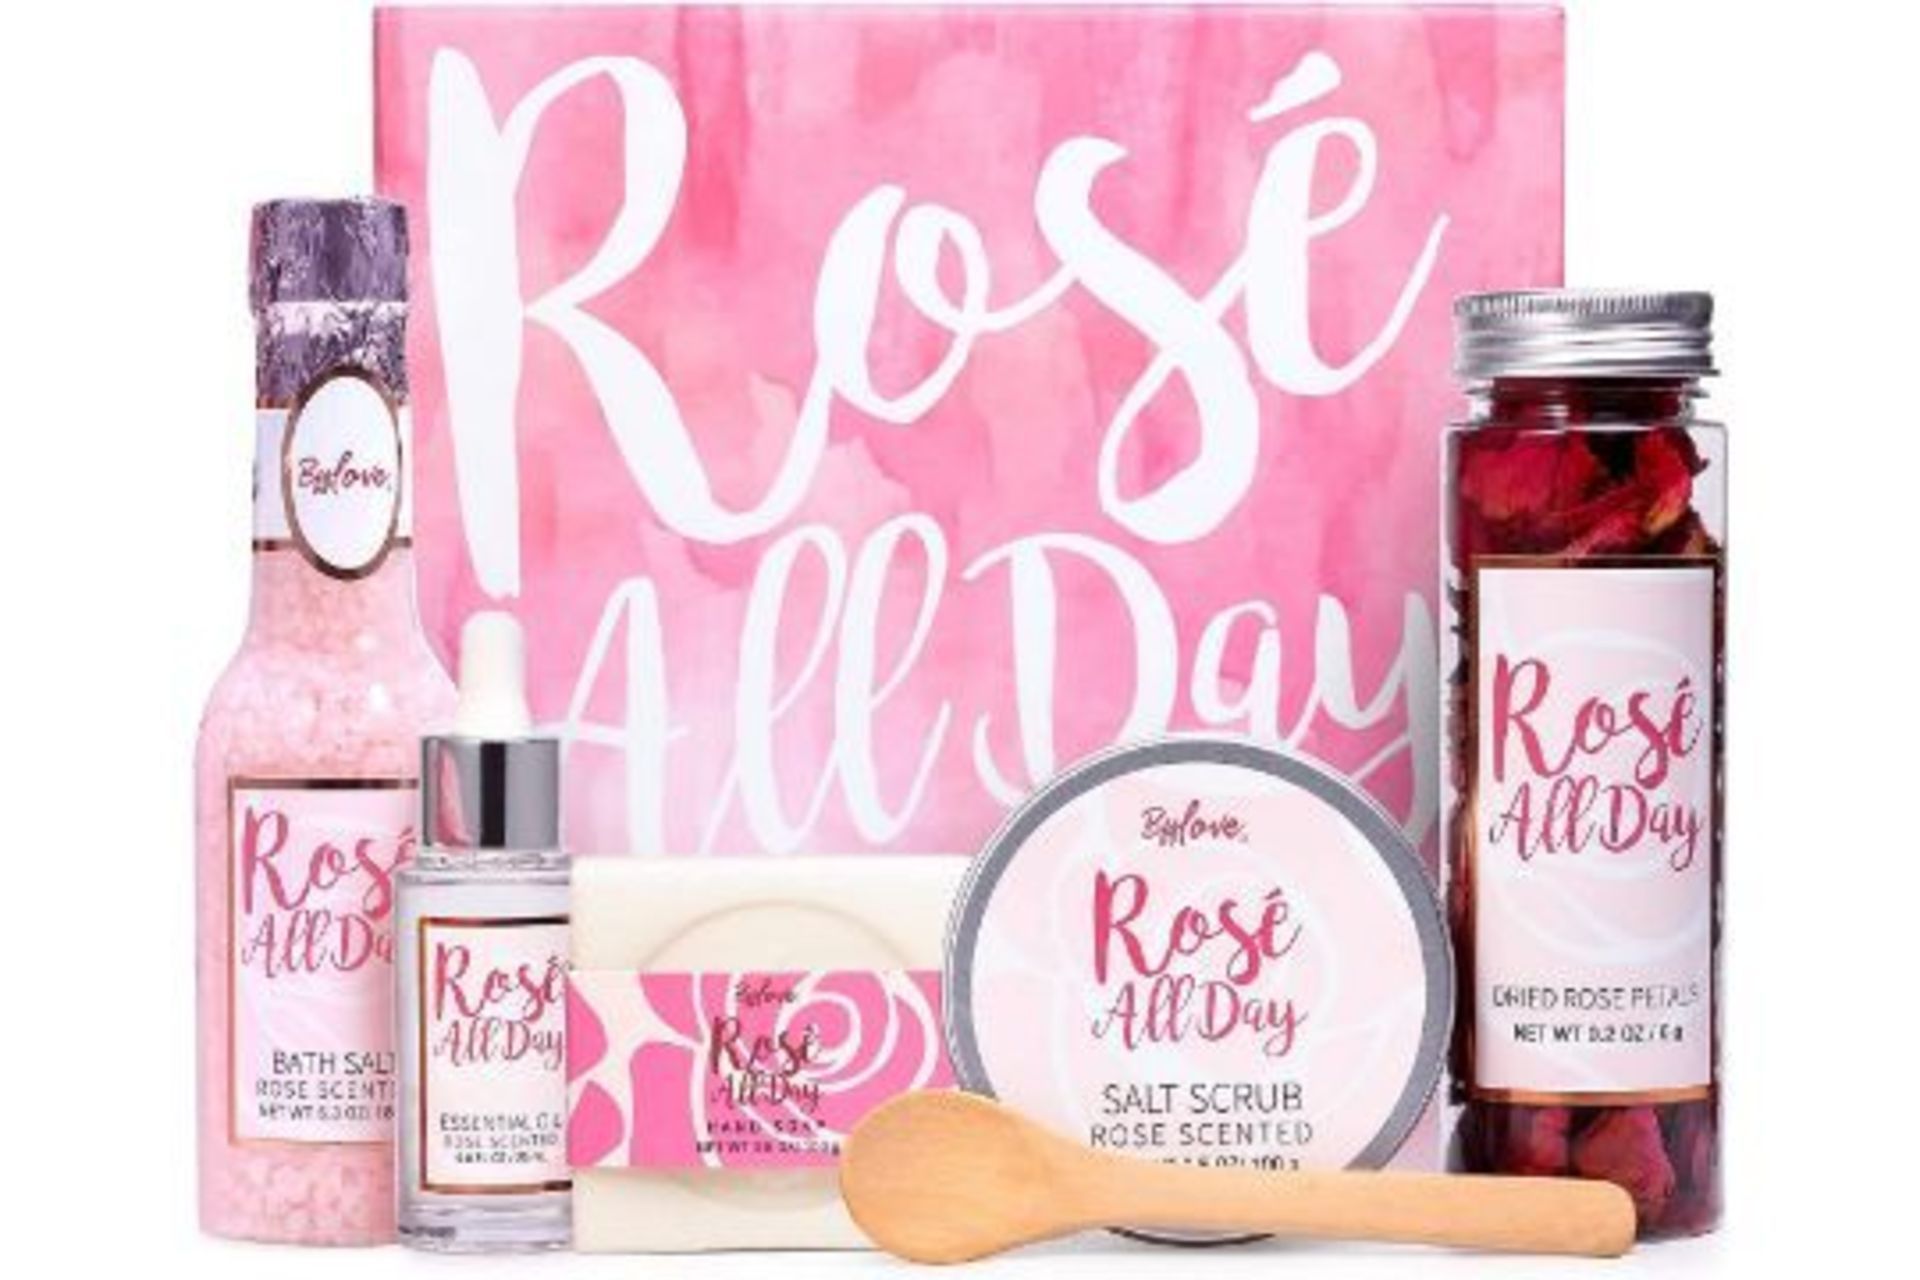 TRADE LOT 32 X NEW PACKAGED Rose All Day Bath Gift Box. (SKU:BFF-BP-11) Best Gift Set for Women -